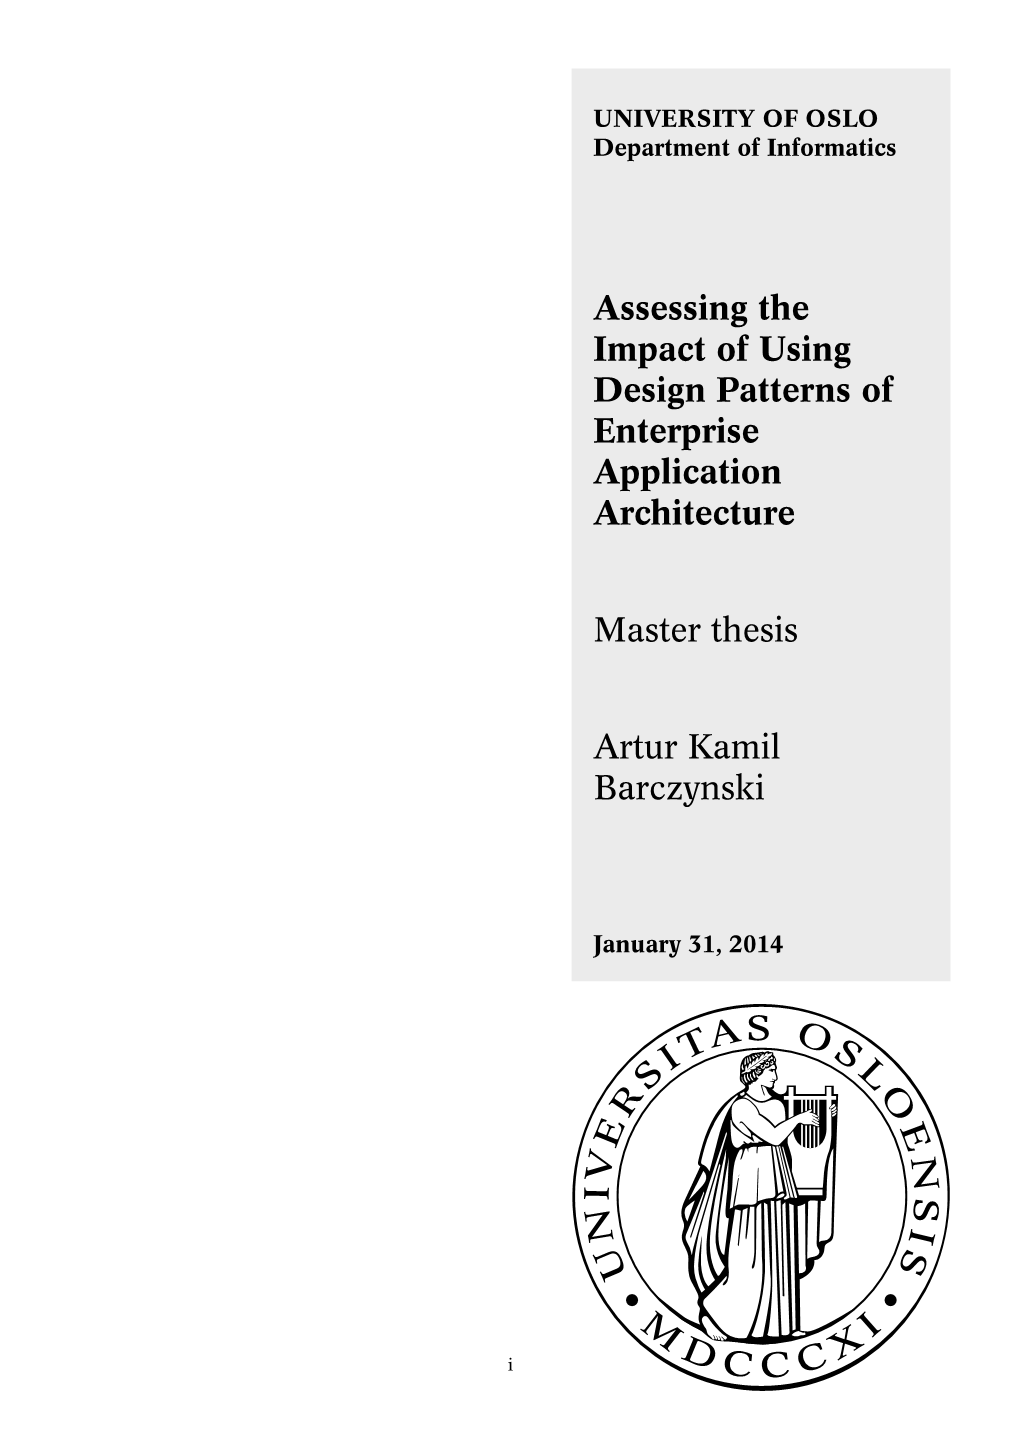 Assessing the Impact of Using Design Patterns of Enterprise Application Architecture